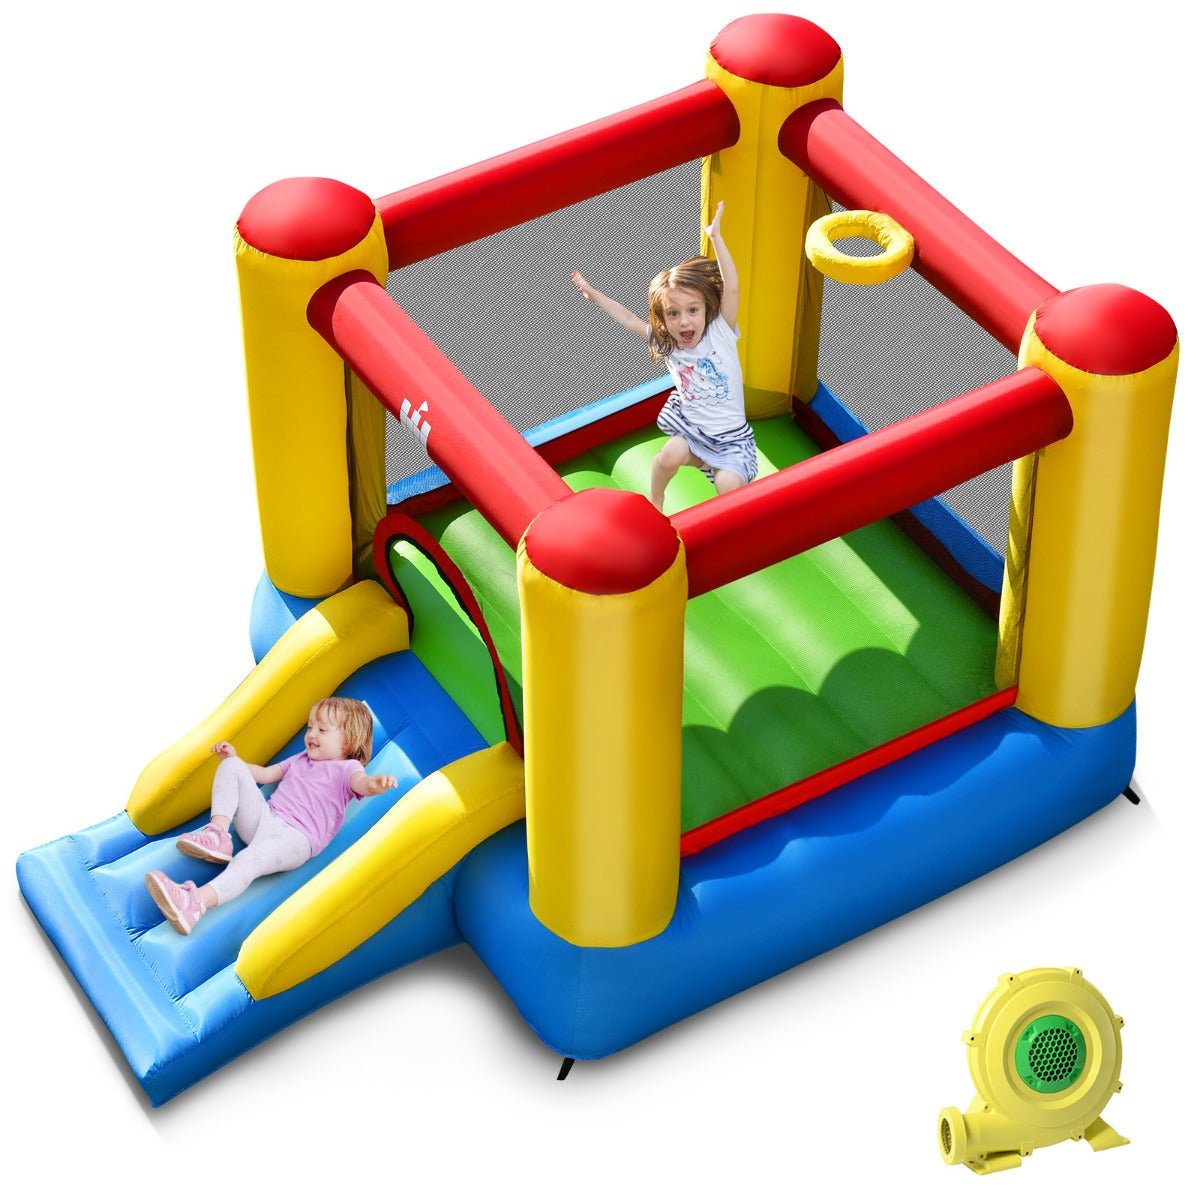 Inflatable Bouncy House for Kids - Slide and Basketball Hoop Included